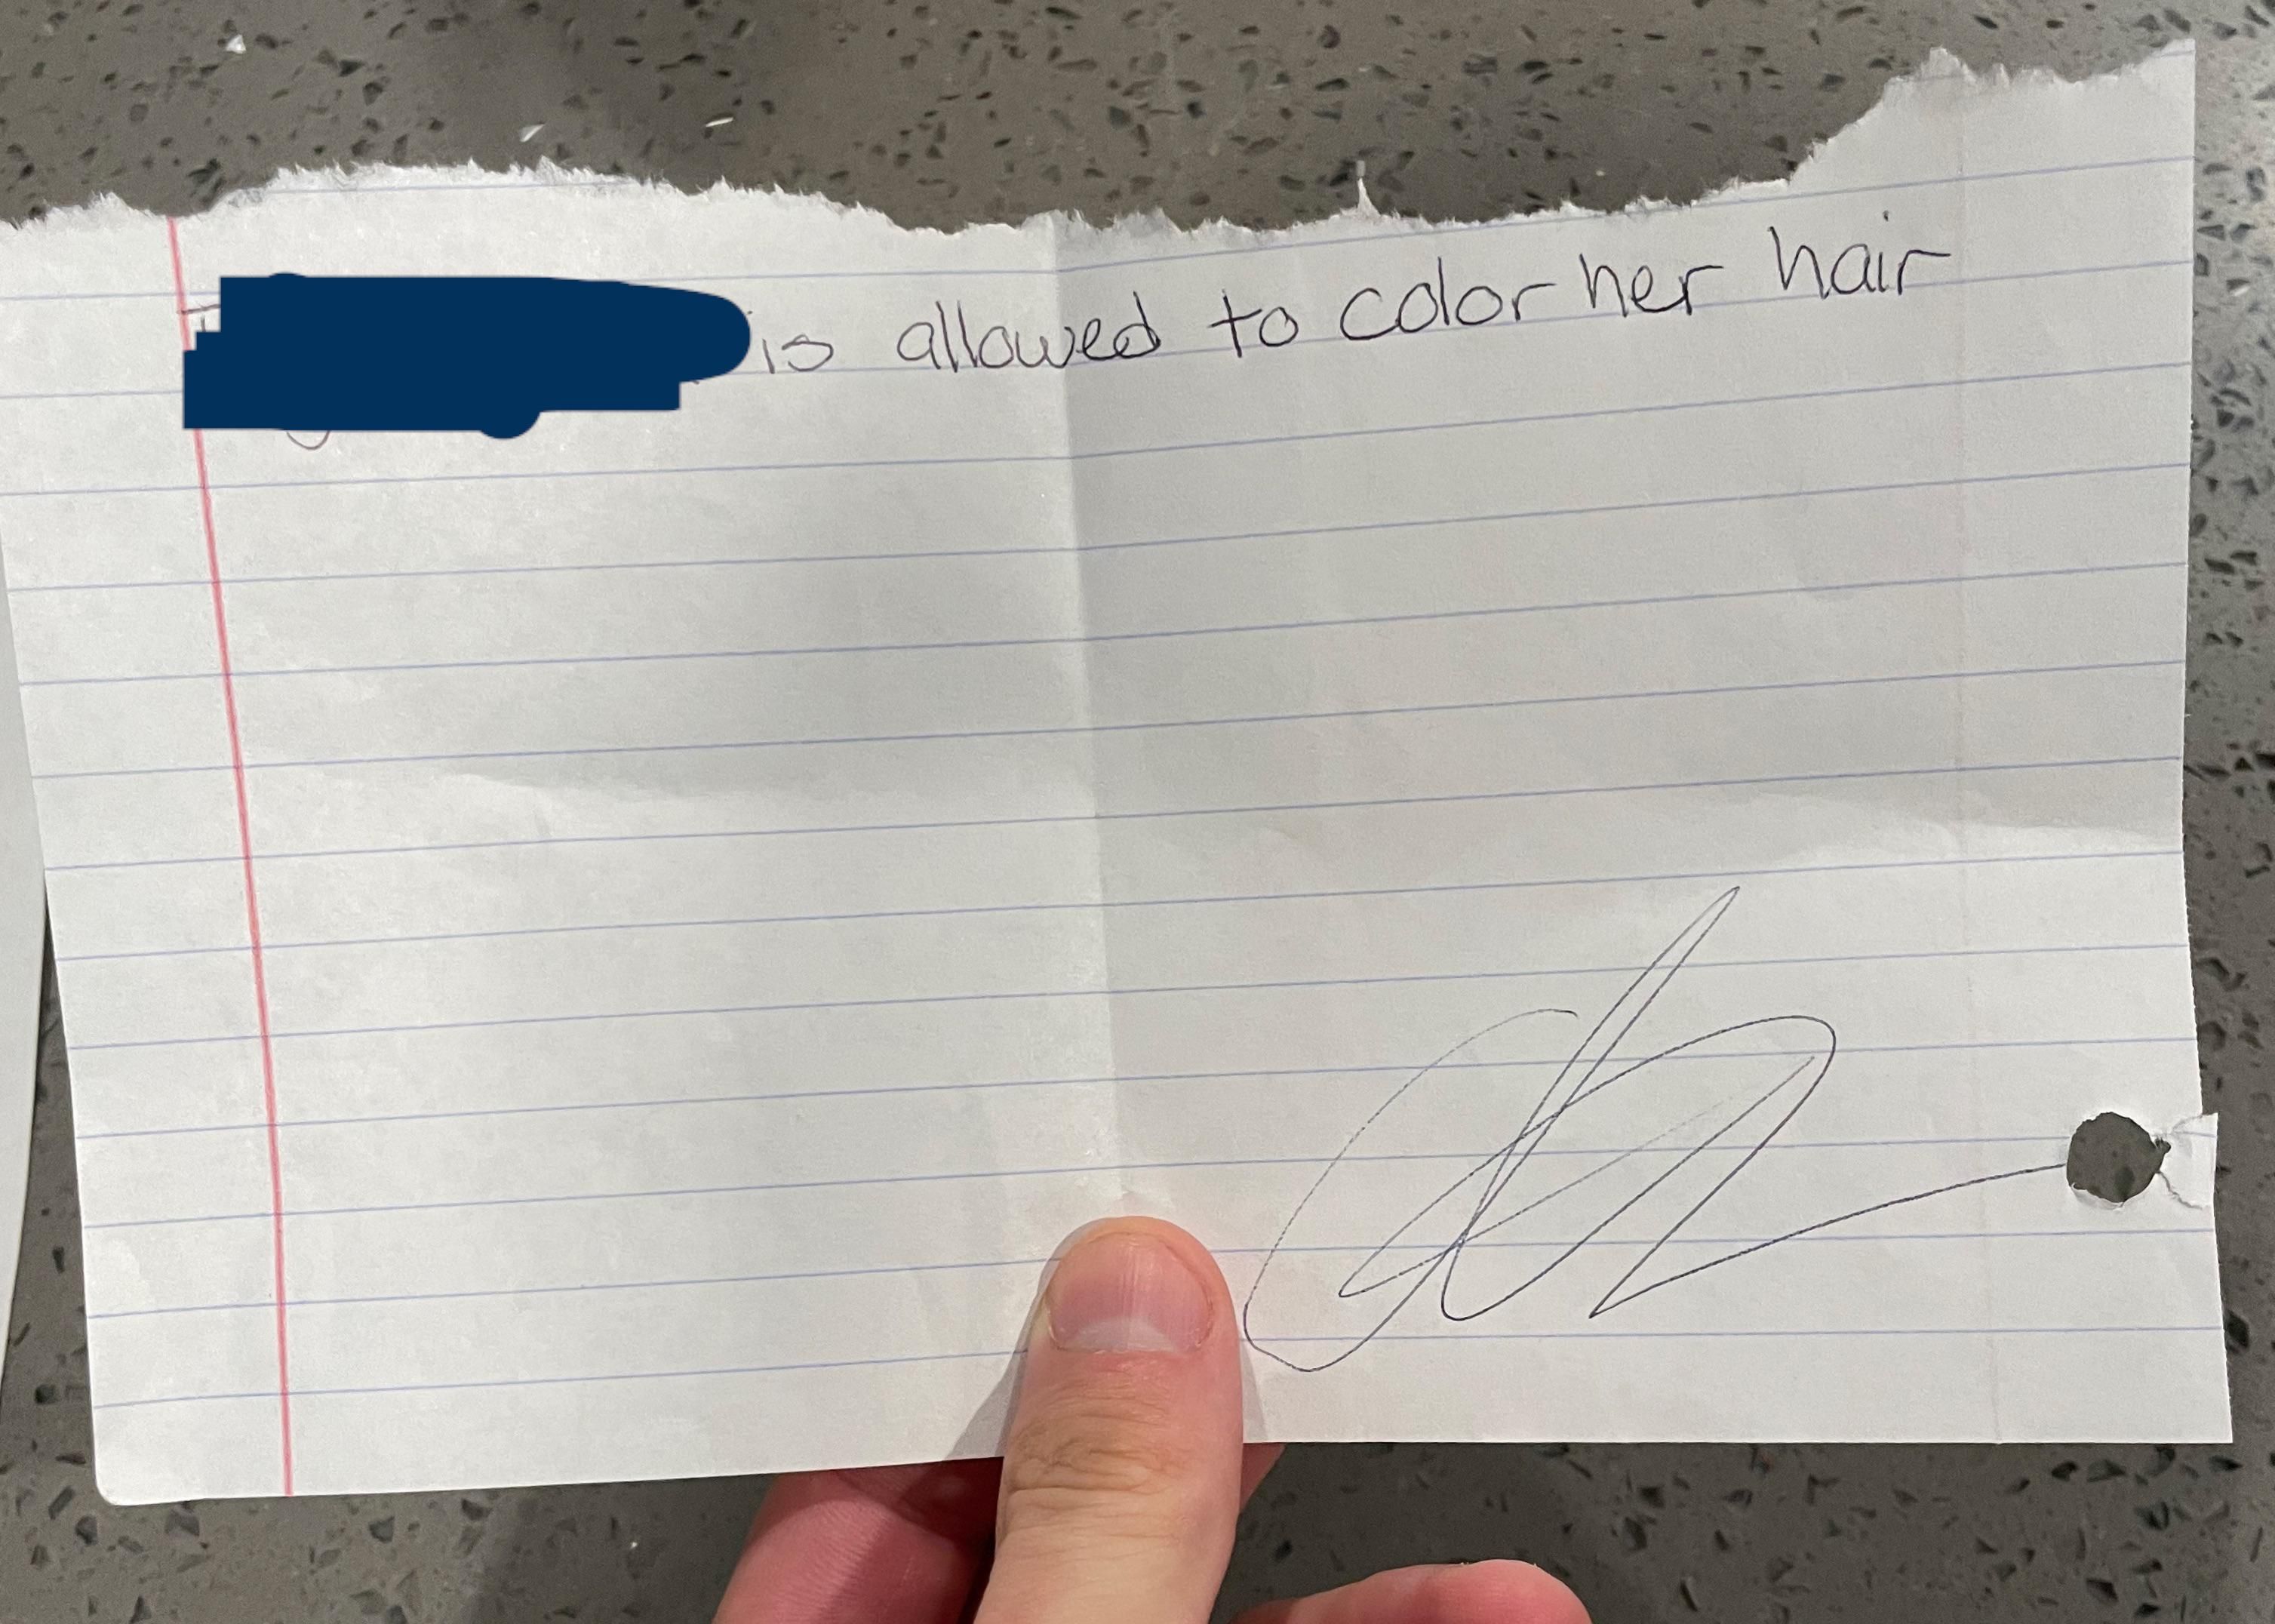 Teenager daughter wanted to dye her hair blue, so we told her bring us something from the school saying she wouldn’t get in any trouble. THIS was the masterpiece submitted as evidence.